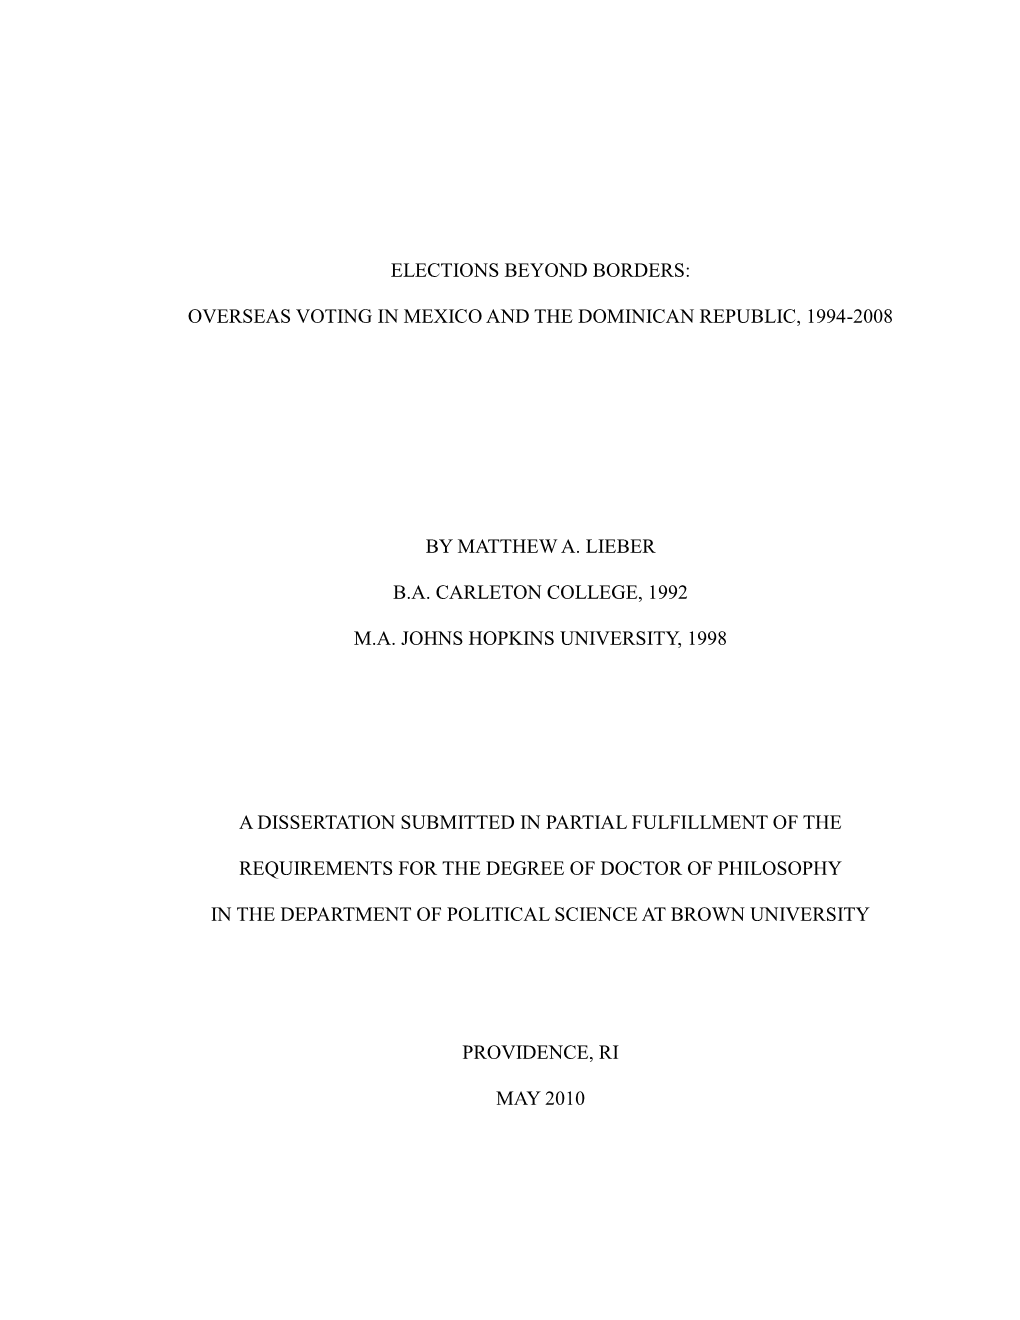 Dissertation: “Global Nations and Extraterritorial Institutions